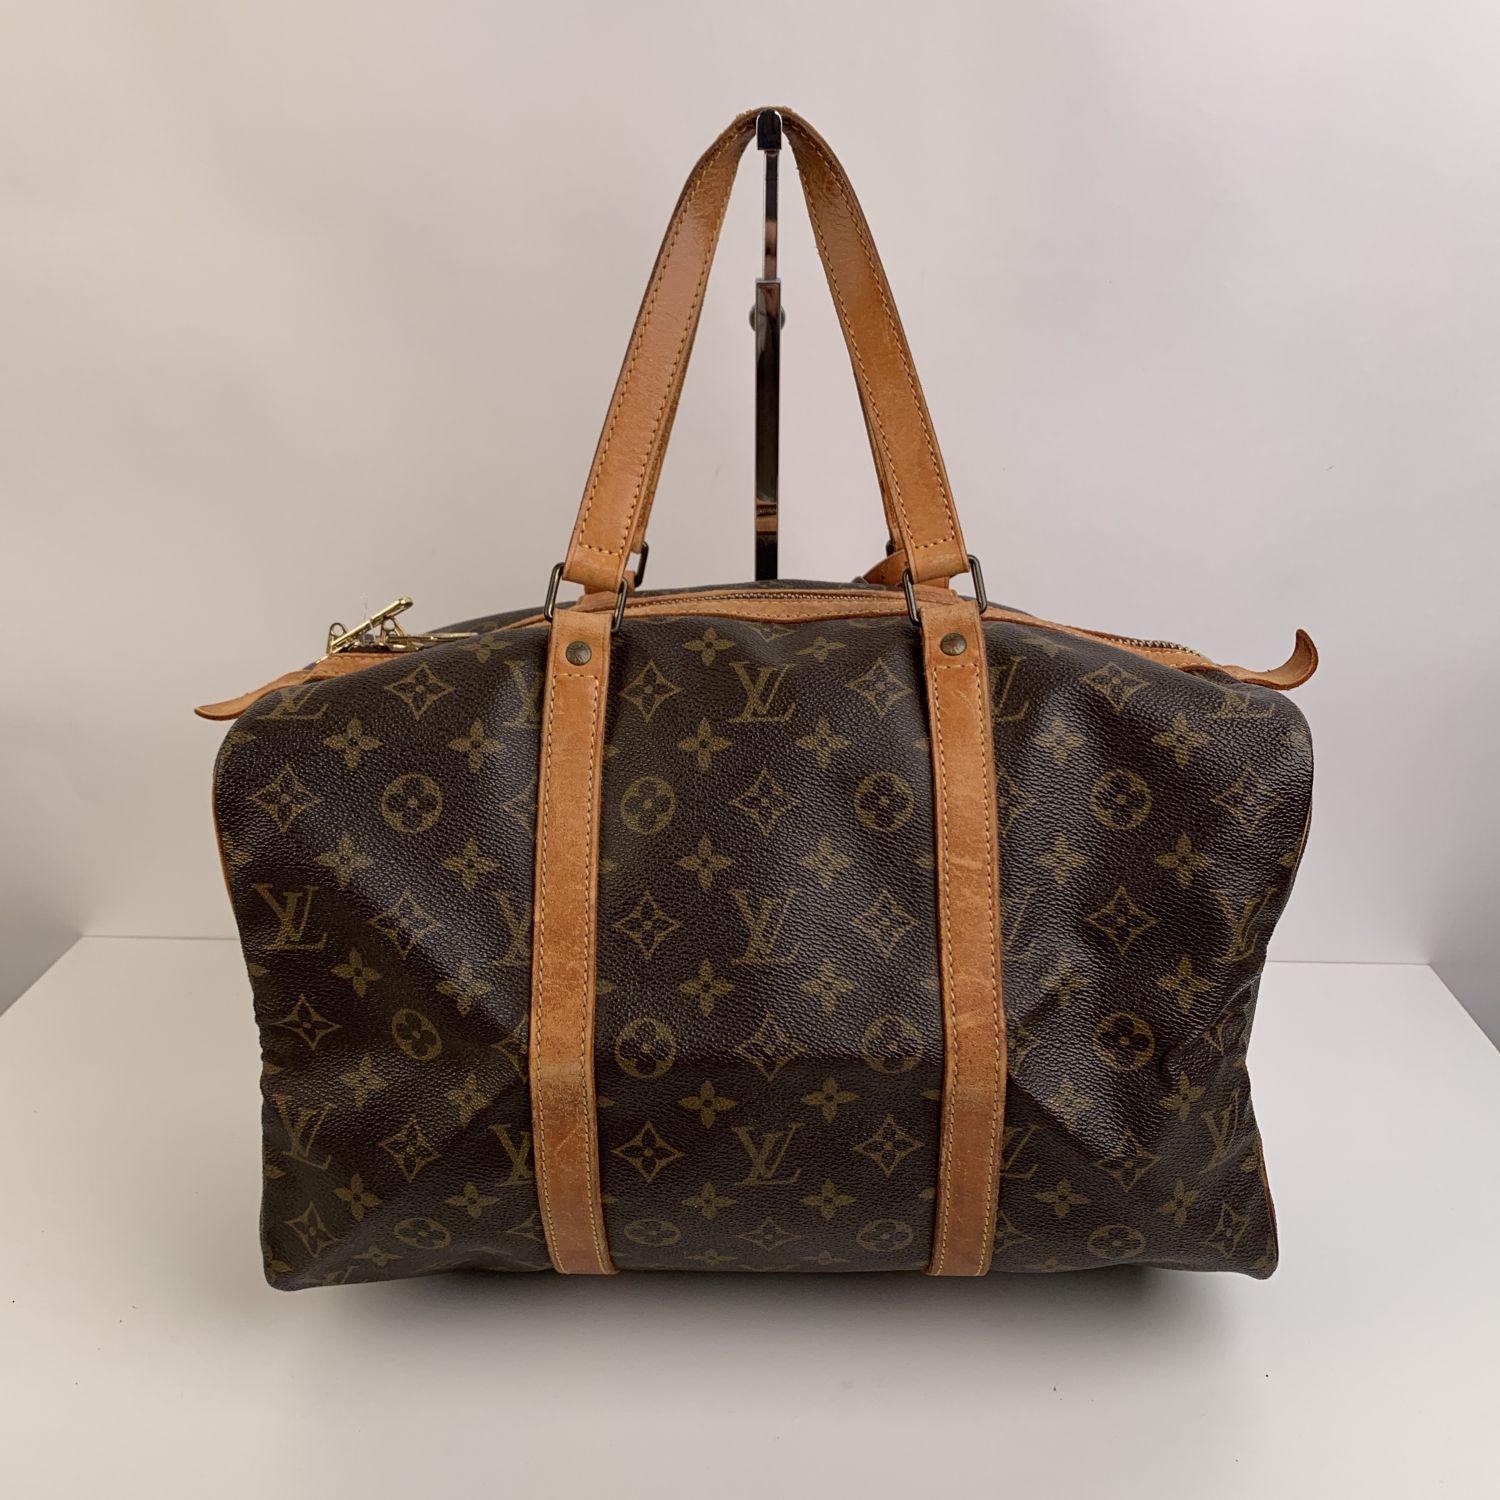 Louis Vuitton classic Monogram Canvas vintage 'Sac Souple' 35. Upper zipper closure. Double leather handles. Brown fabric lining. 'Louis Vuitton Paris - made in France' engraved on leather piece on the side.Removable ID leather tag. Discontinued